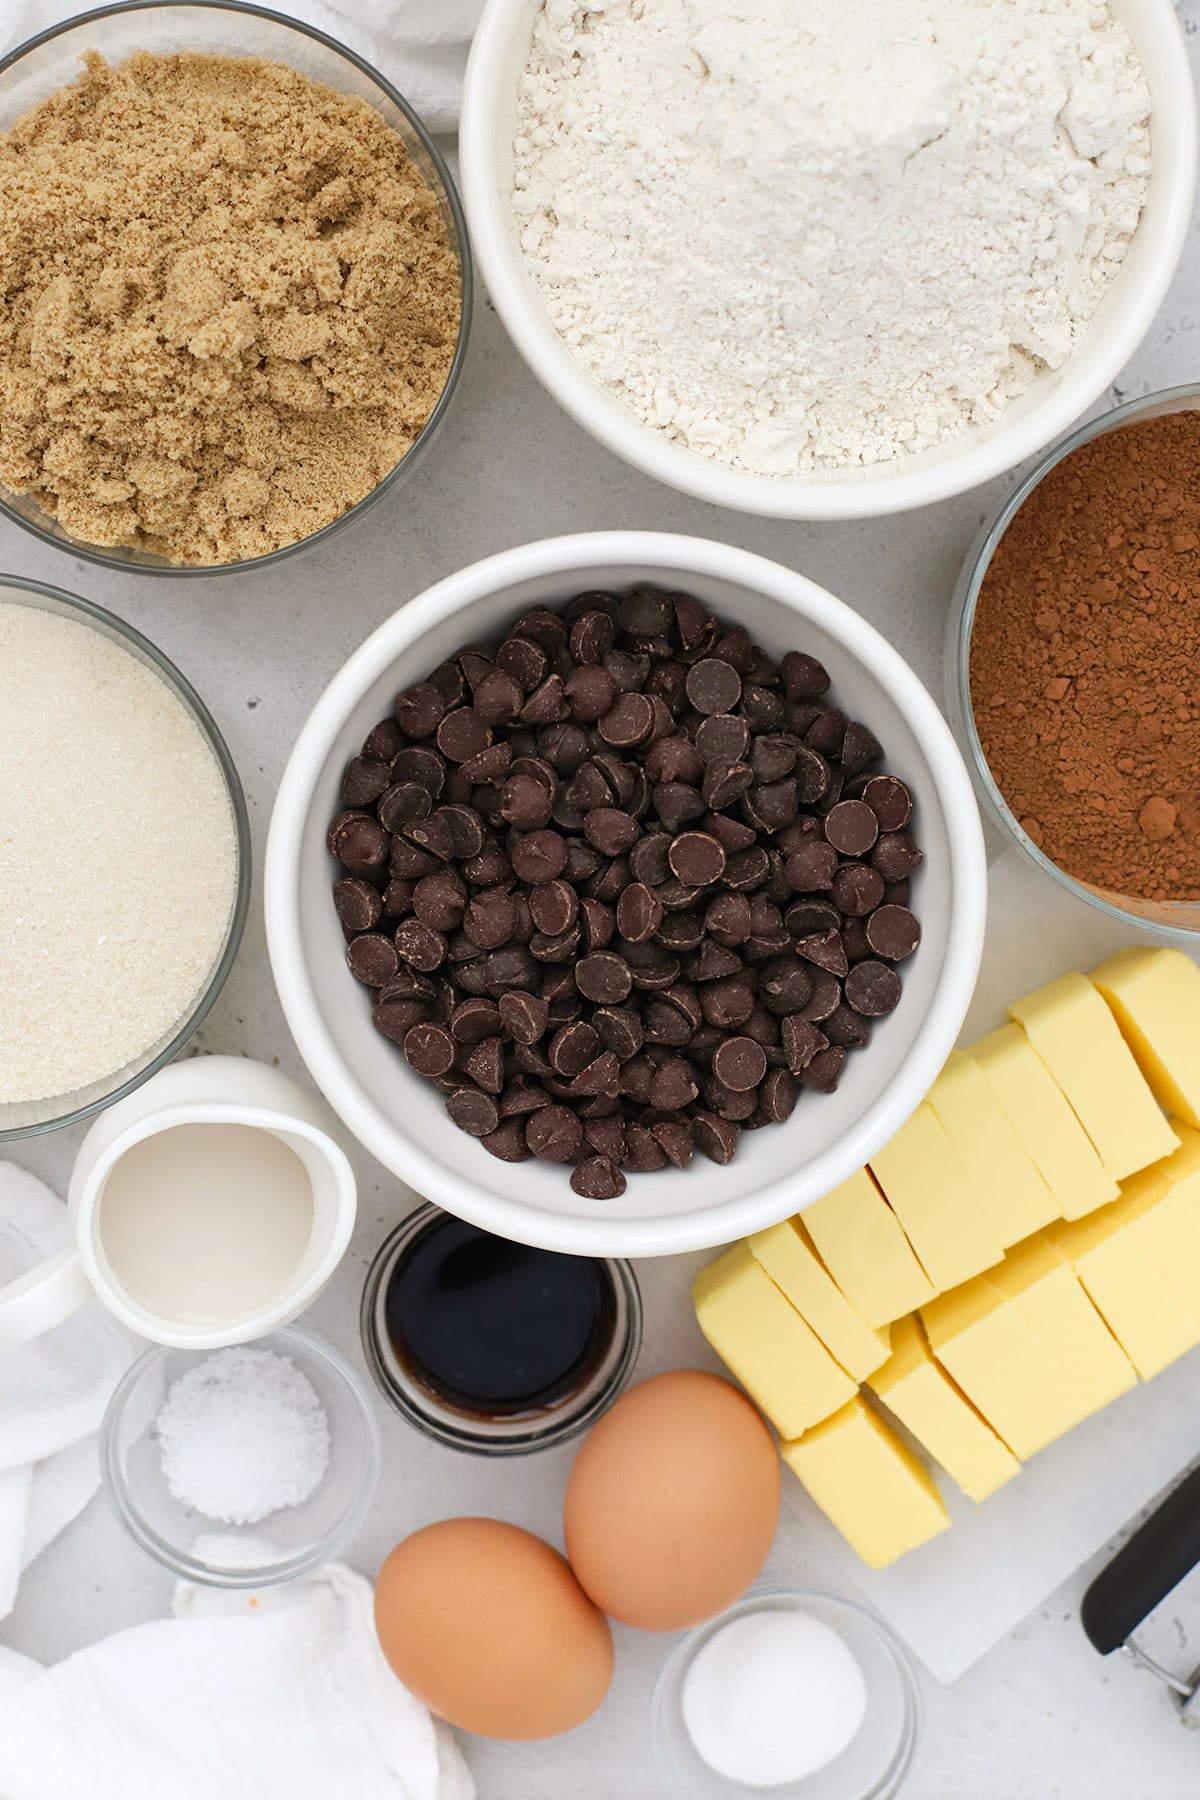 Ingredients for gluten-free chocolate chocolate chip cookies